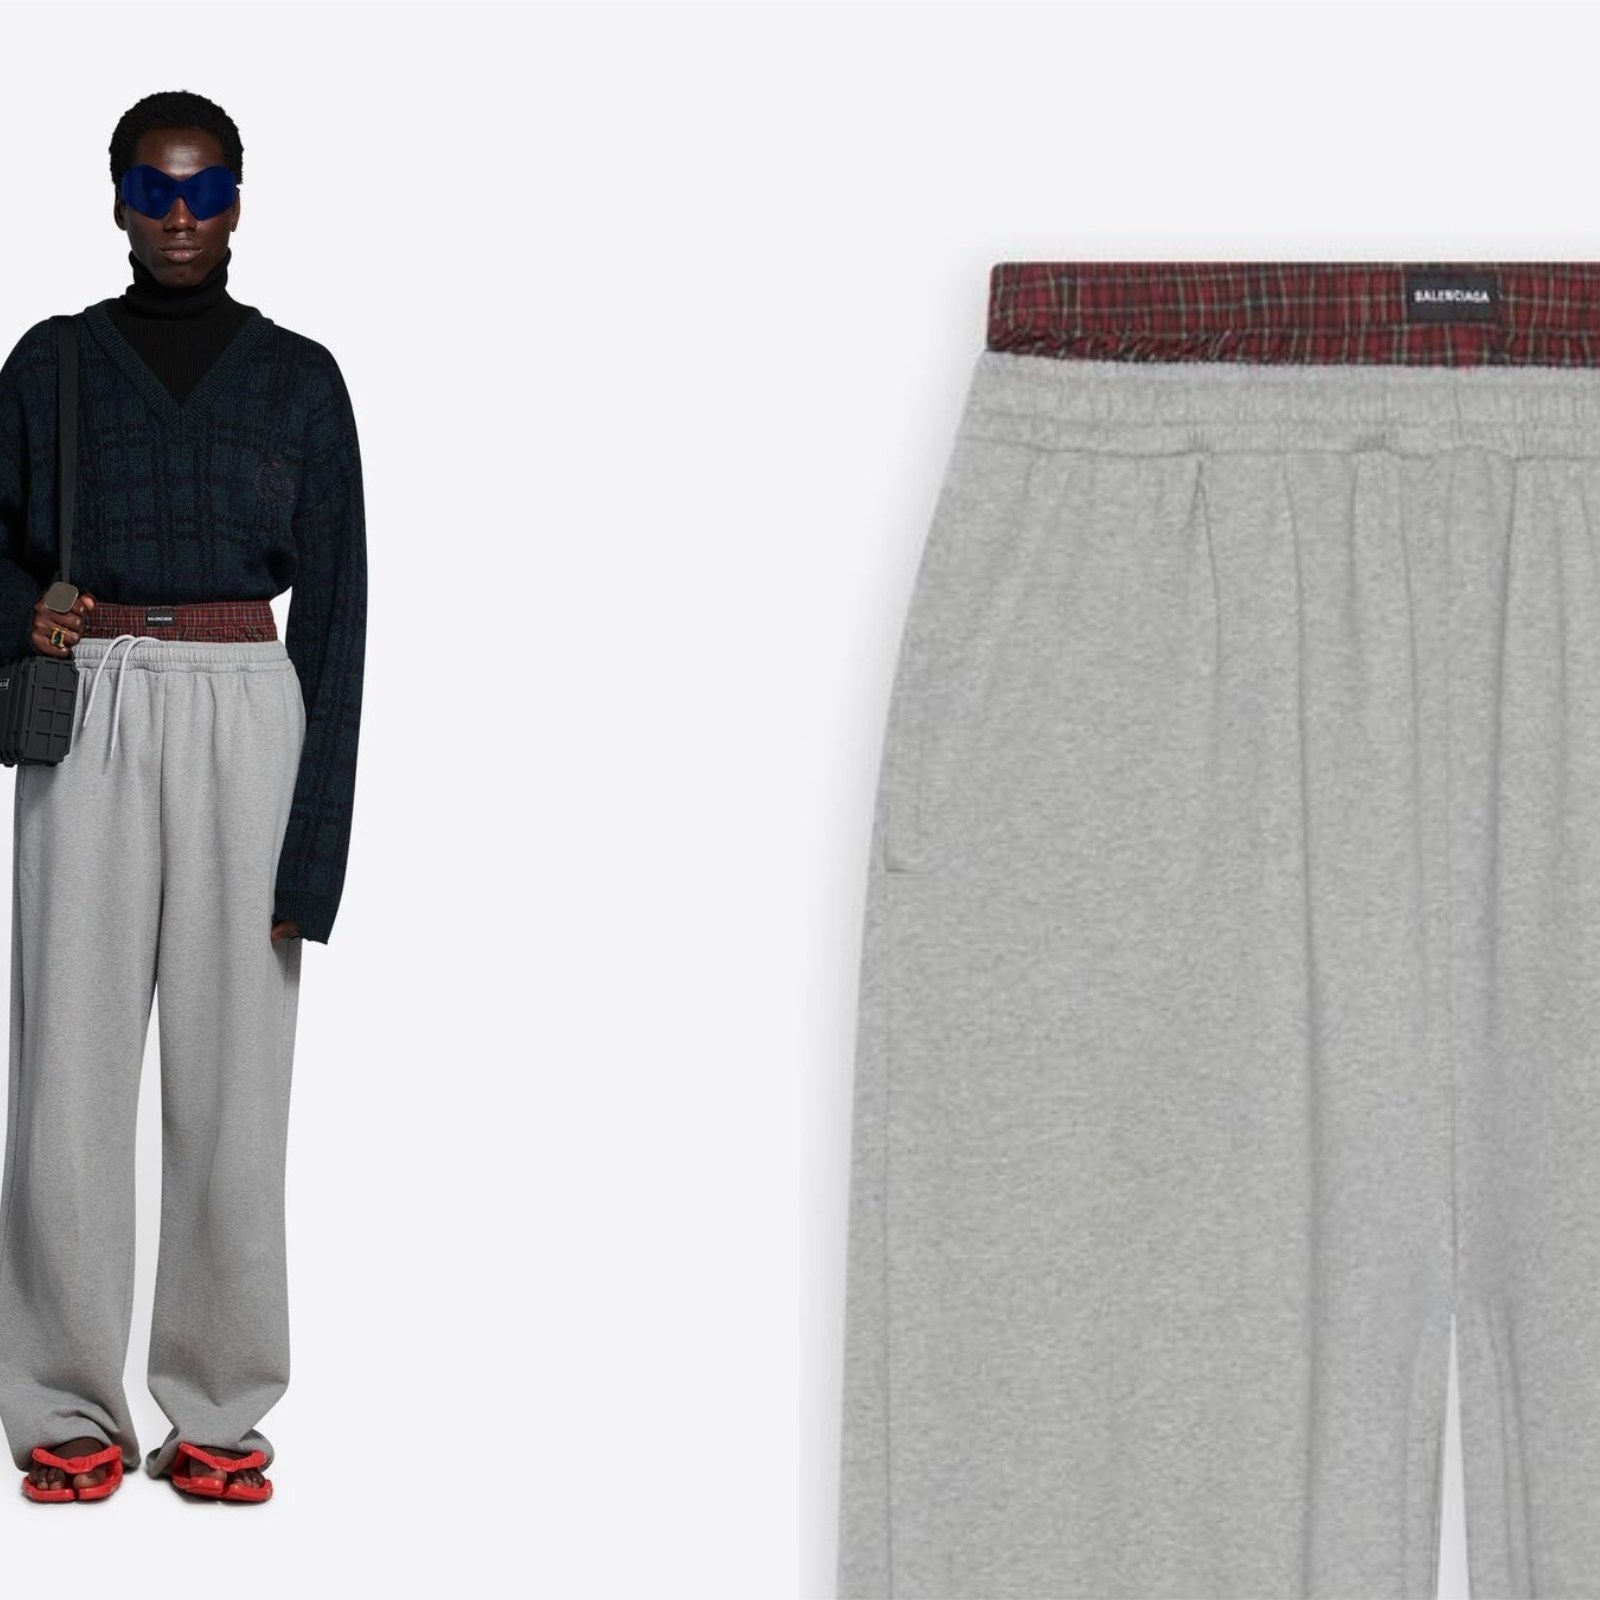 Balenciaga Called Out For Cultural Appropriation Over Its $1,190 Pants ...